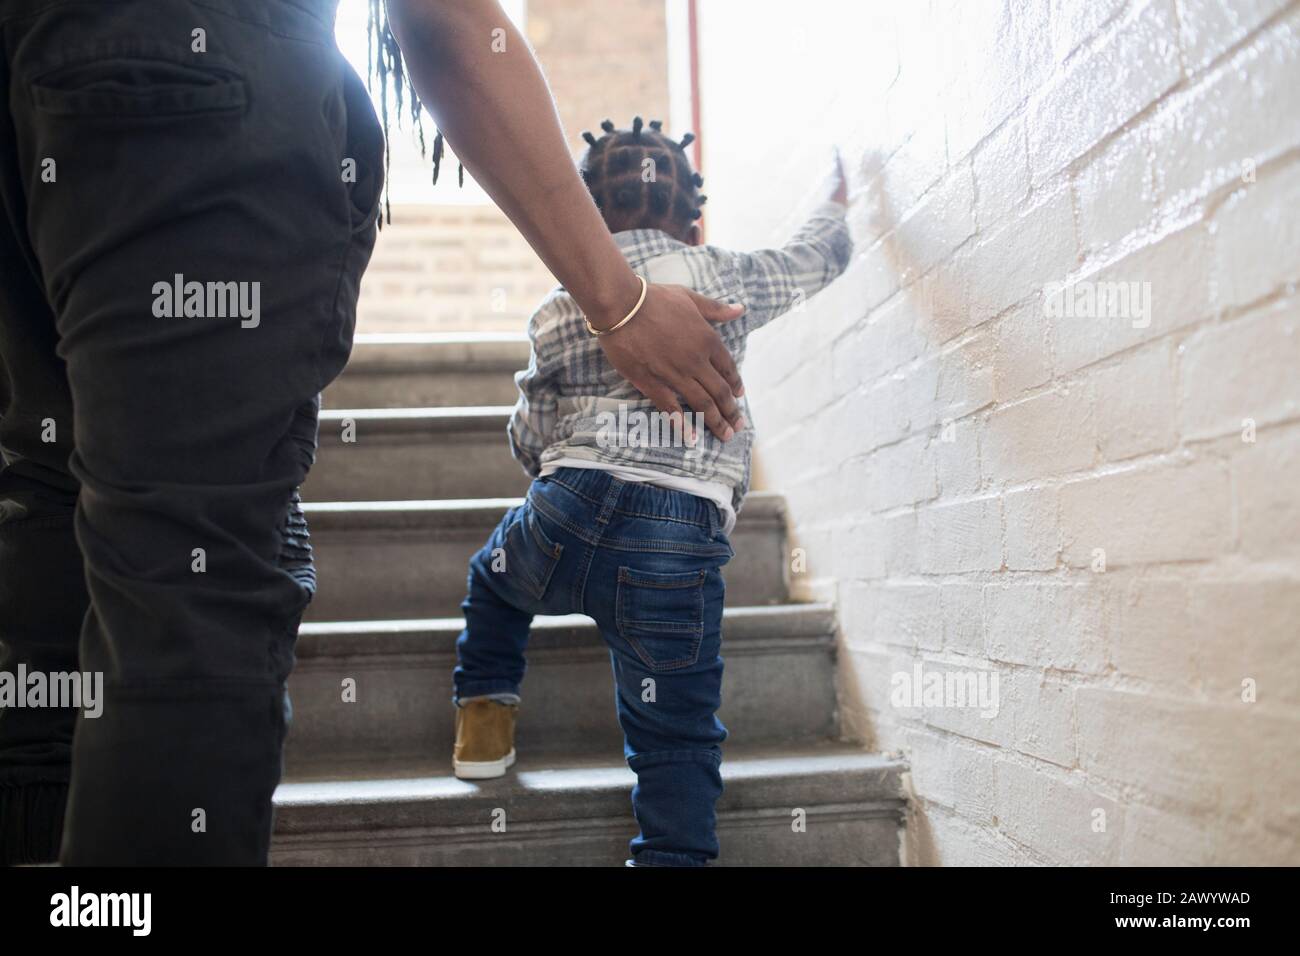 Father helping toddler son climb stairs in stairwell Stock Photo